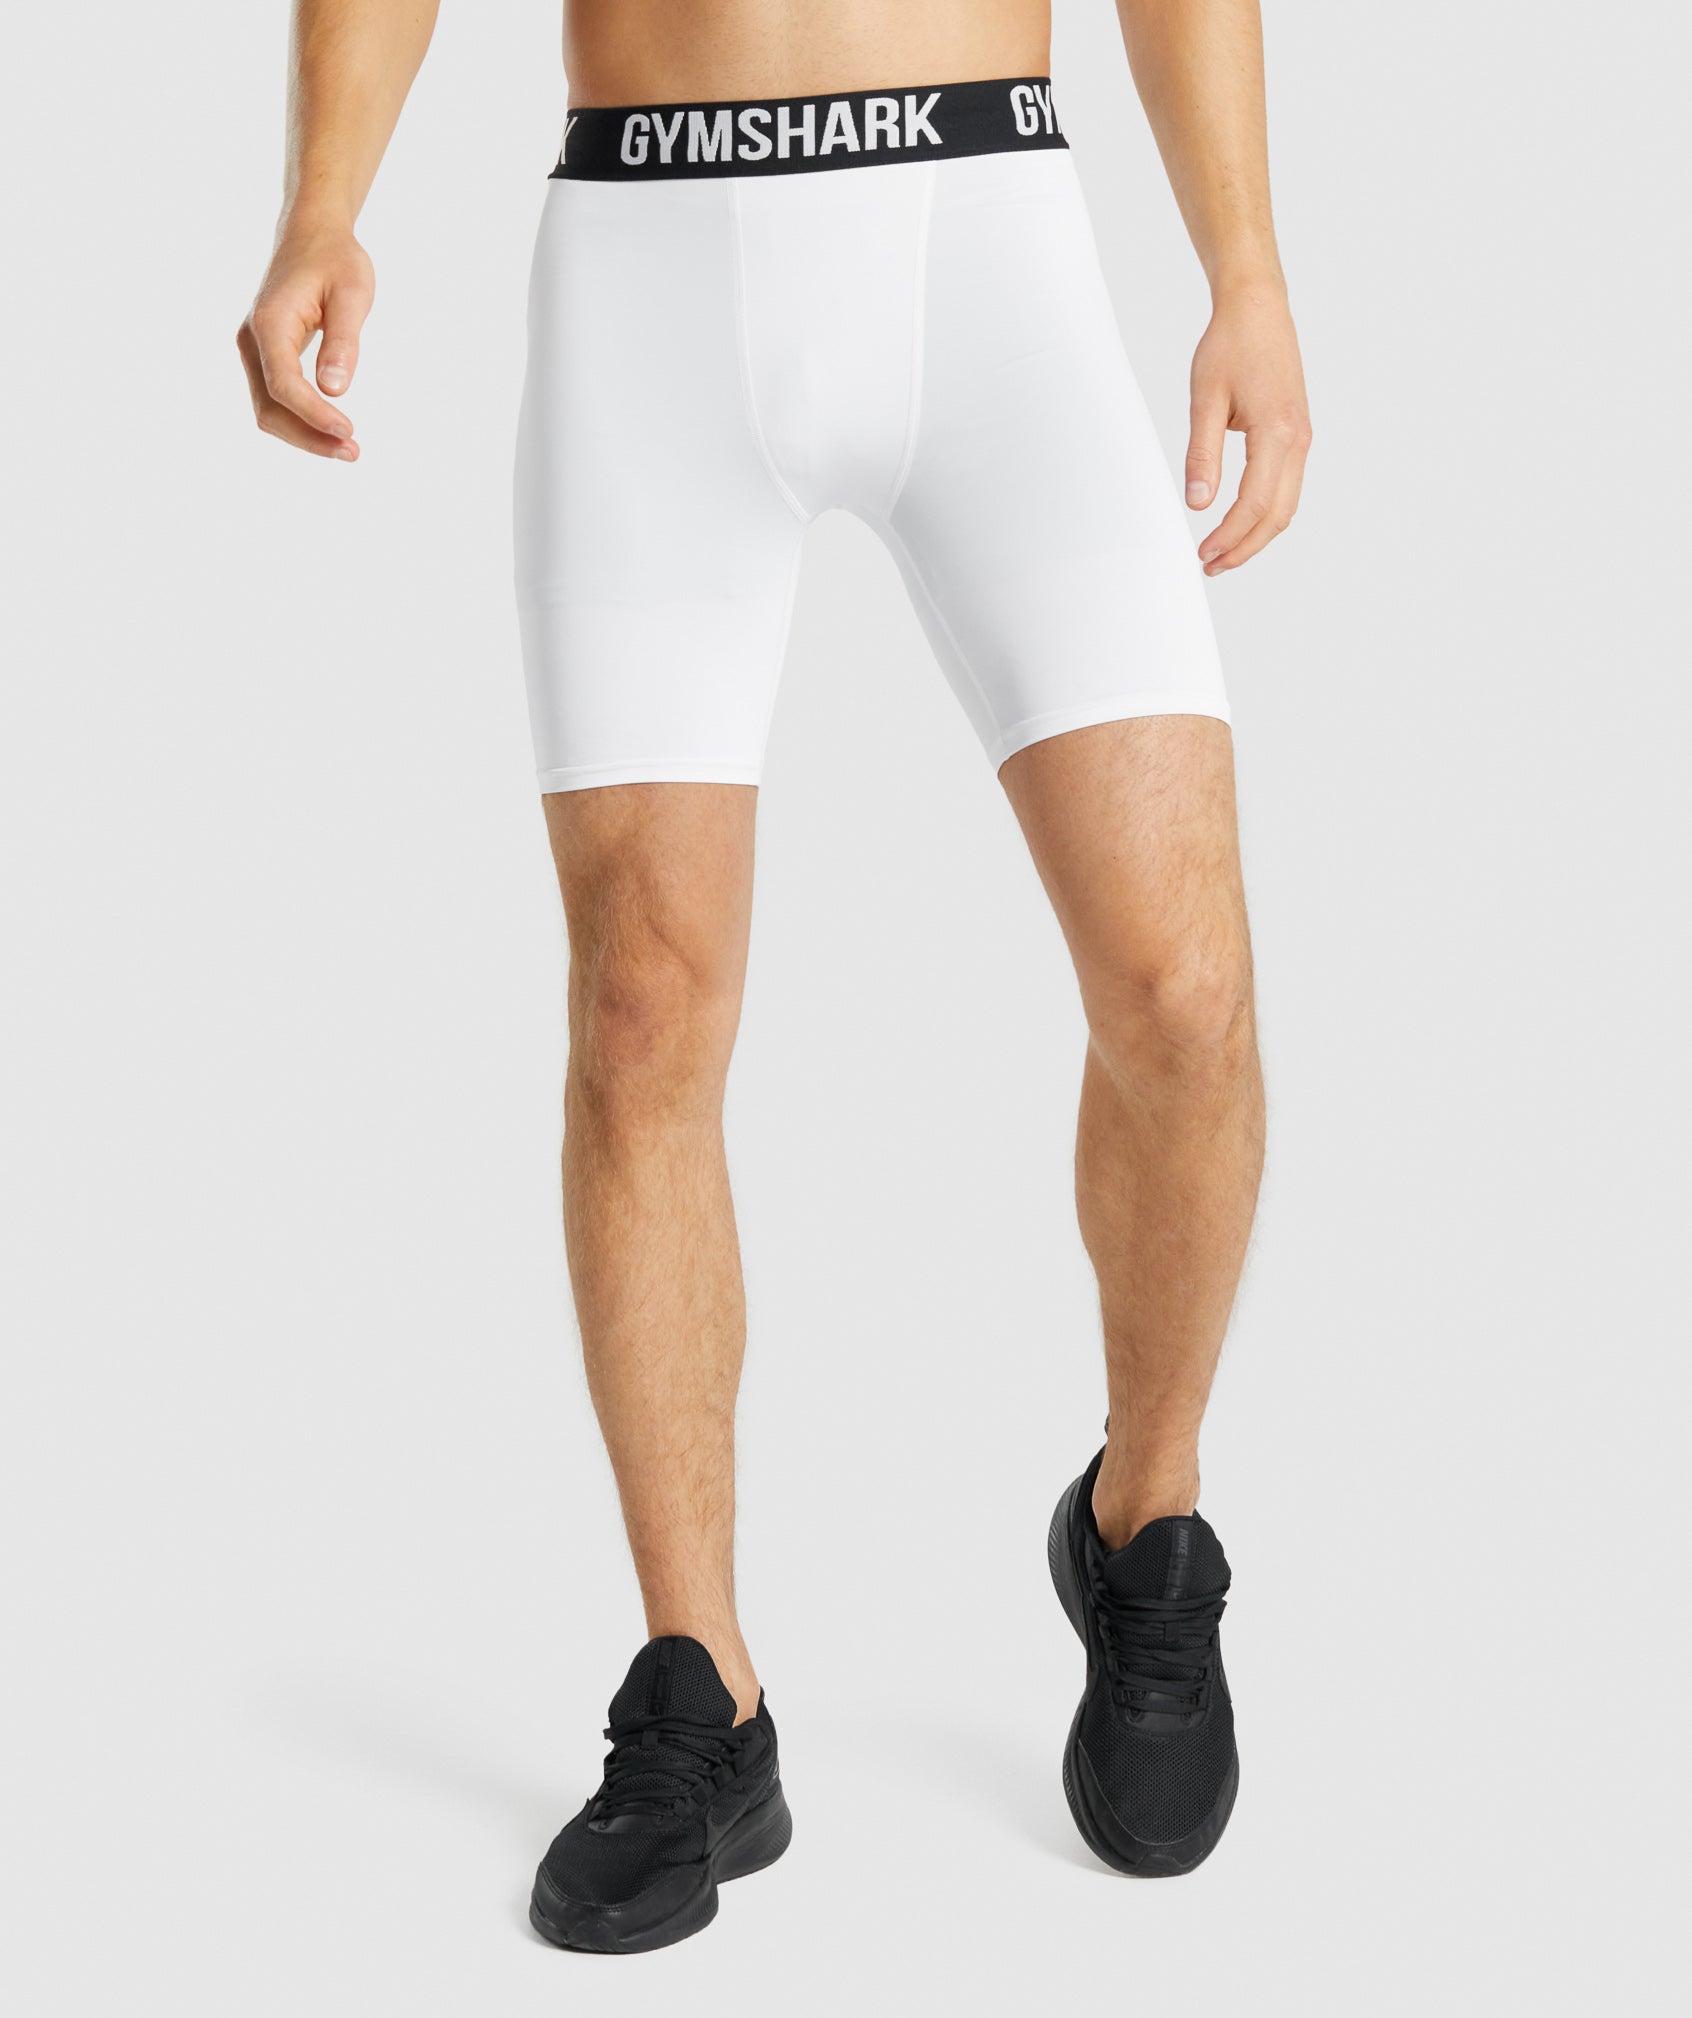 NEW Nike Pro Combat White Compression Shorts Youth Small